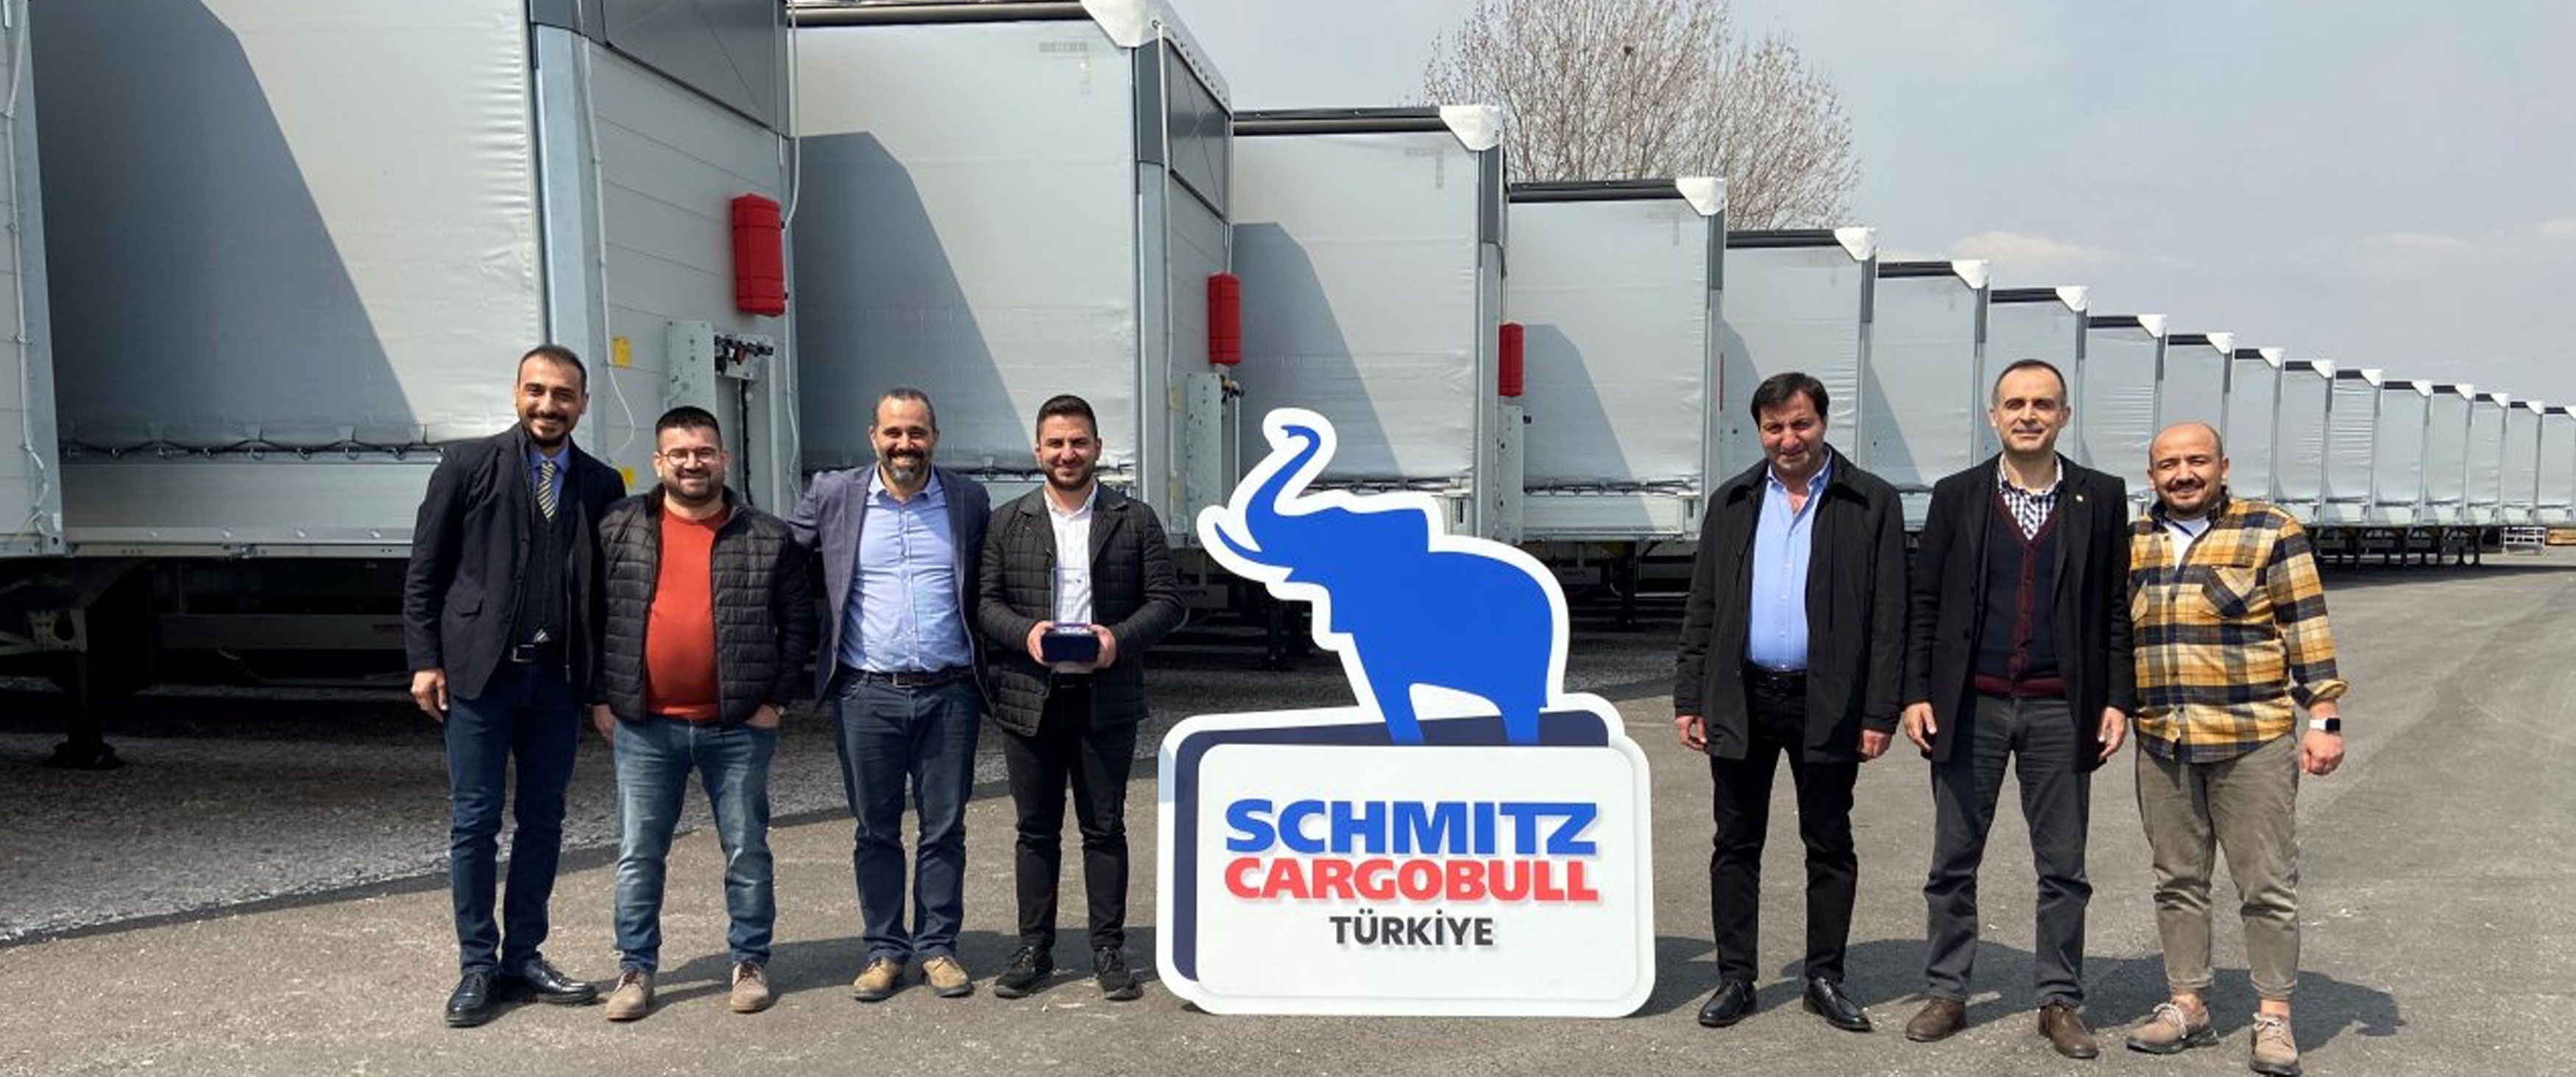 Biggest Delivery of the Year from Schmitz Cargobull to Erpet Logistics